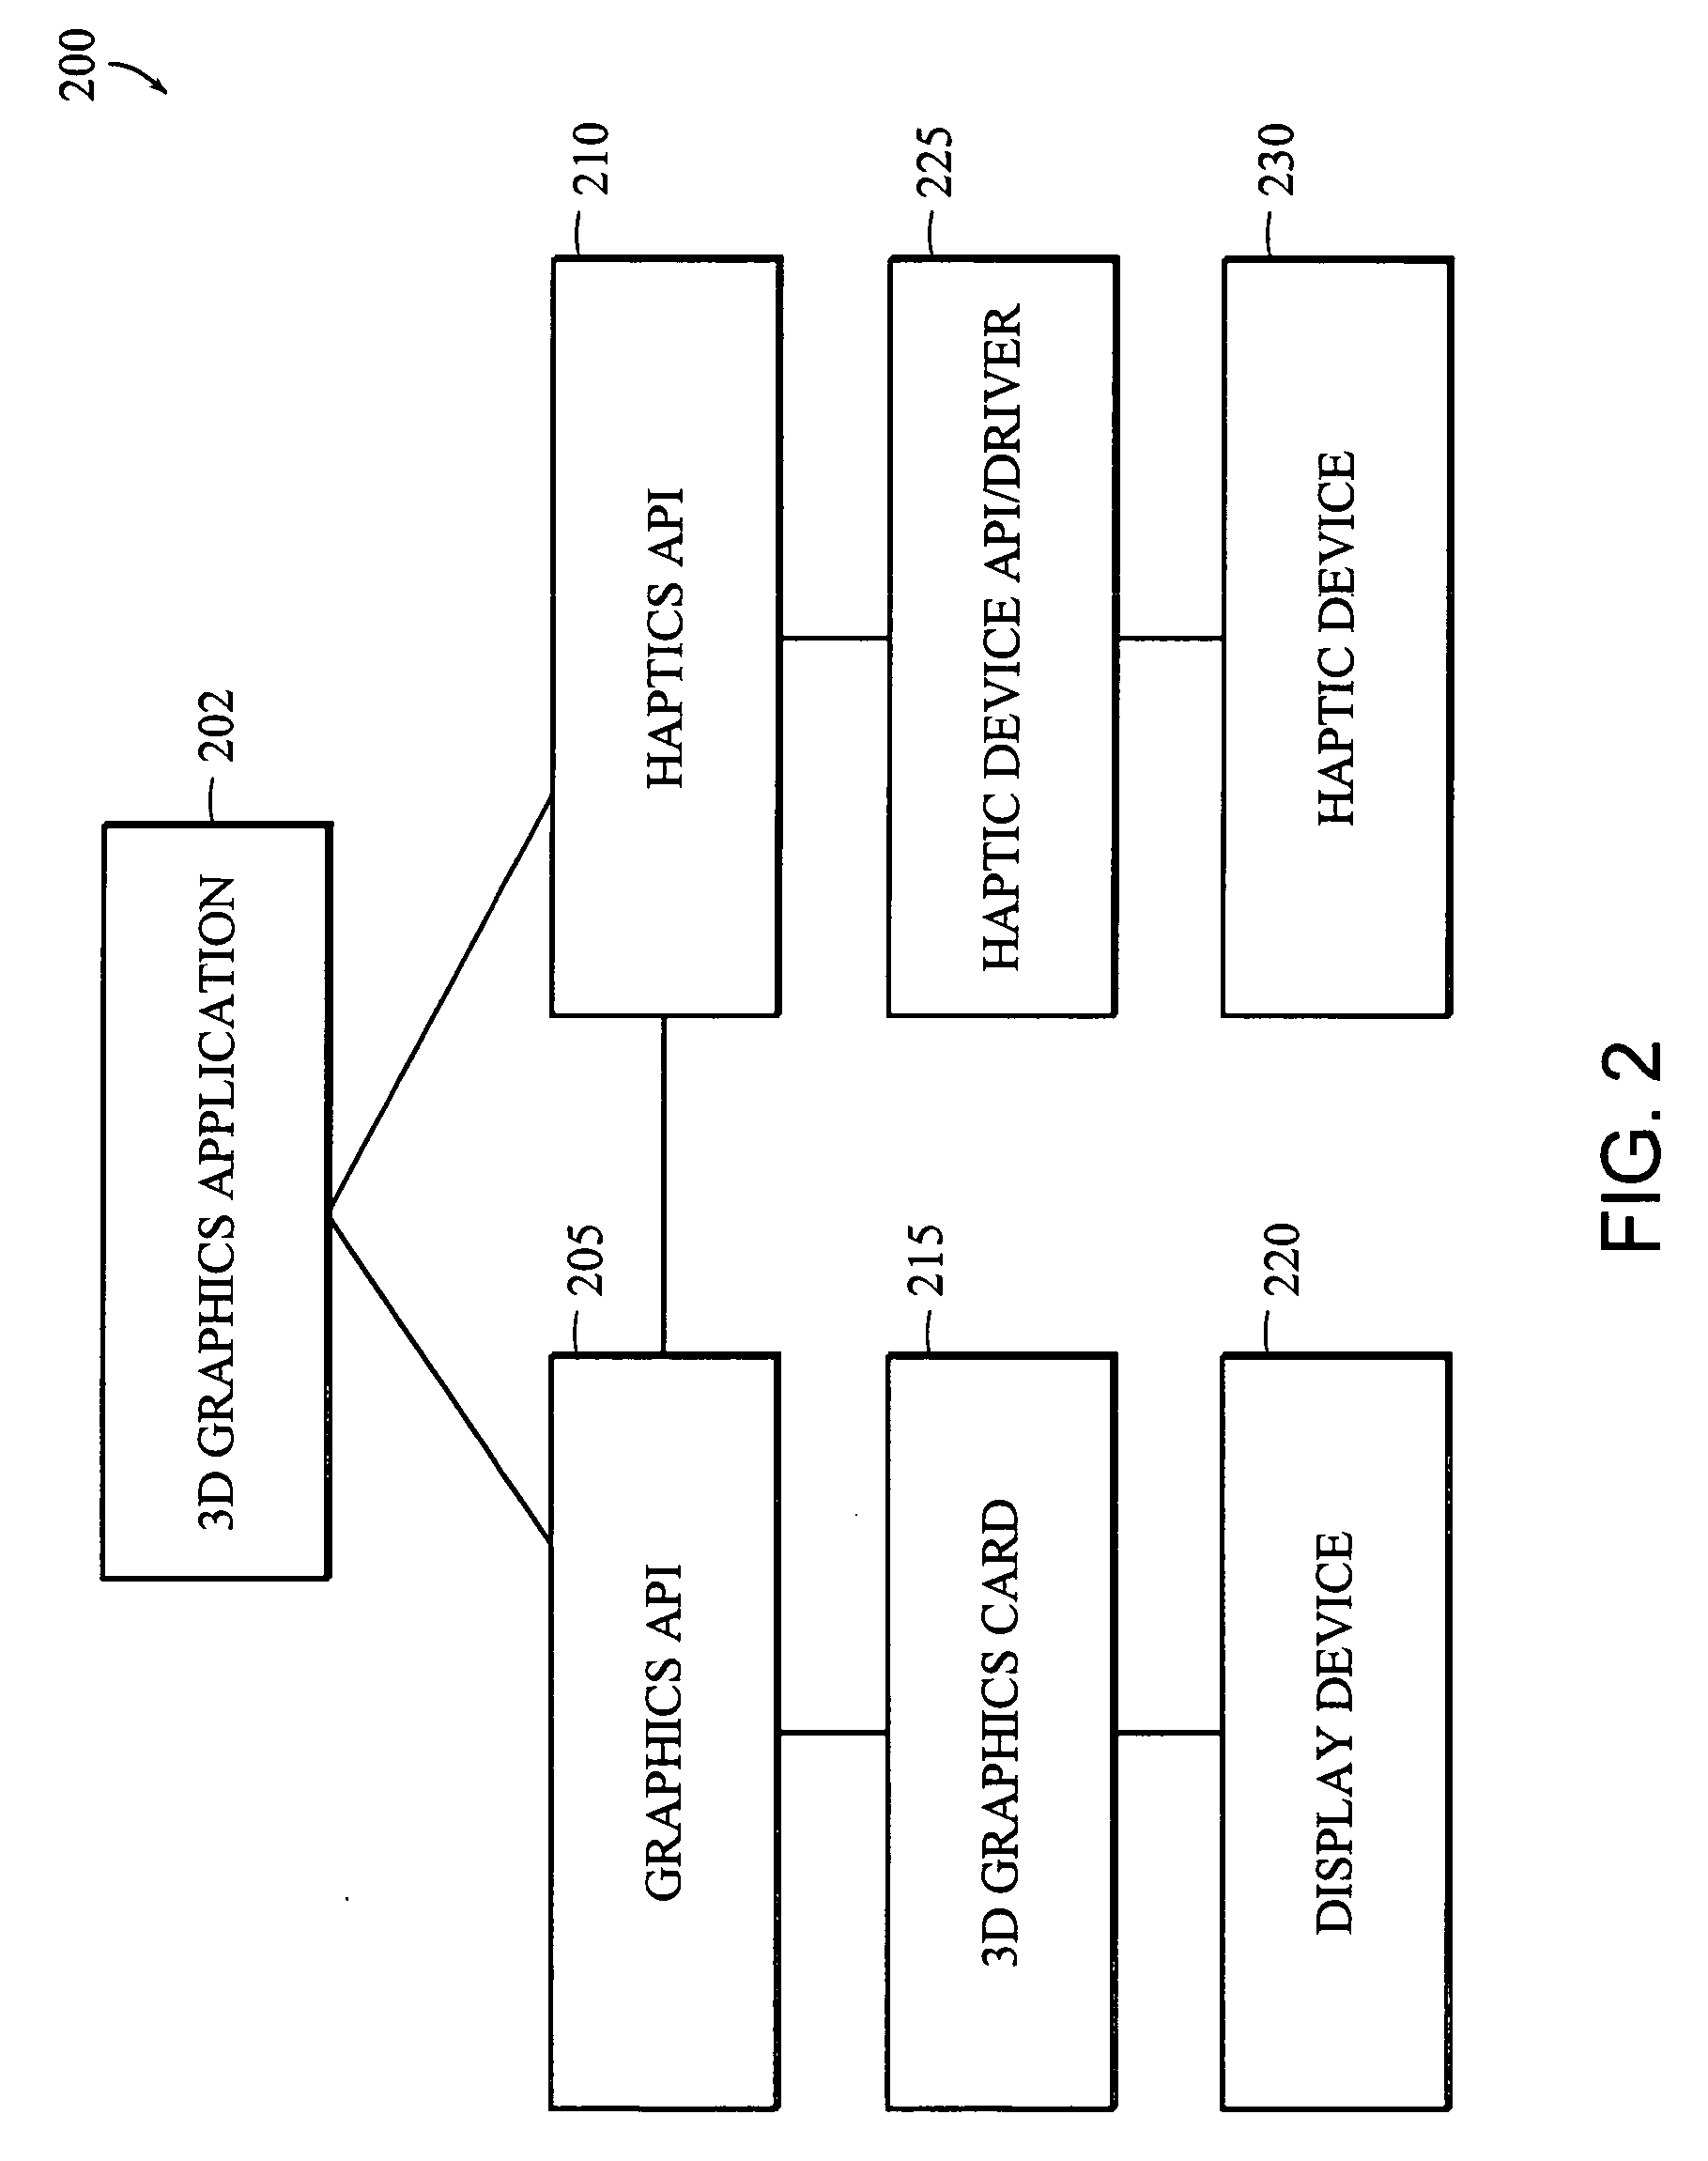 Apparatus and methods for haptic rendering using a haptic camera view